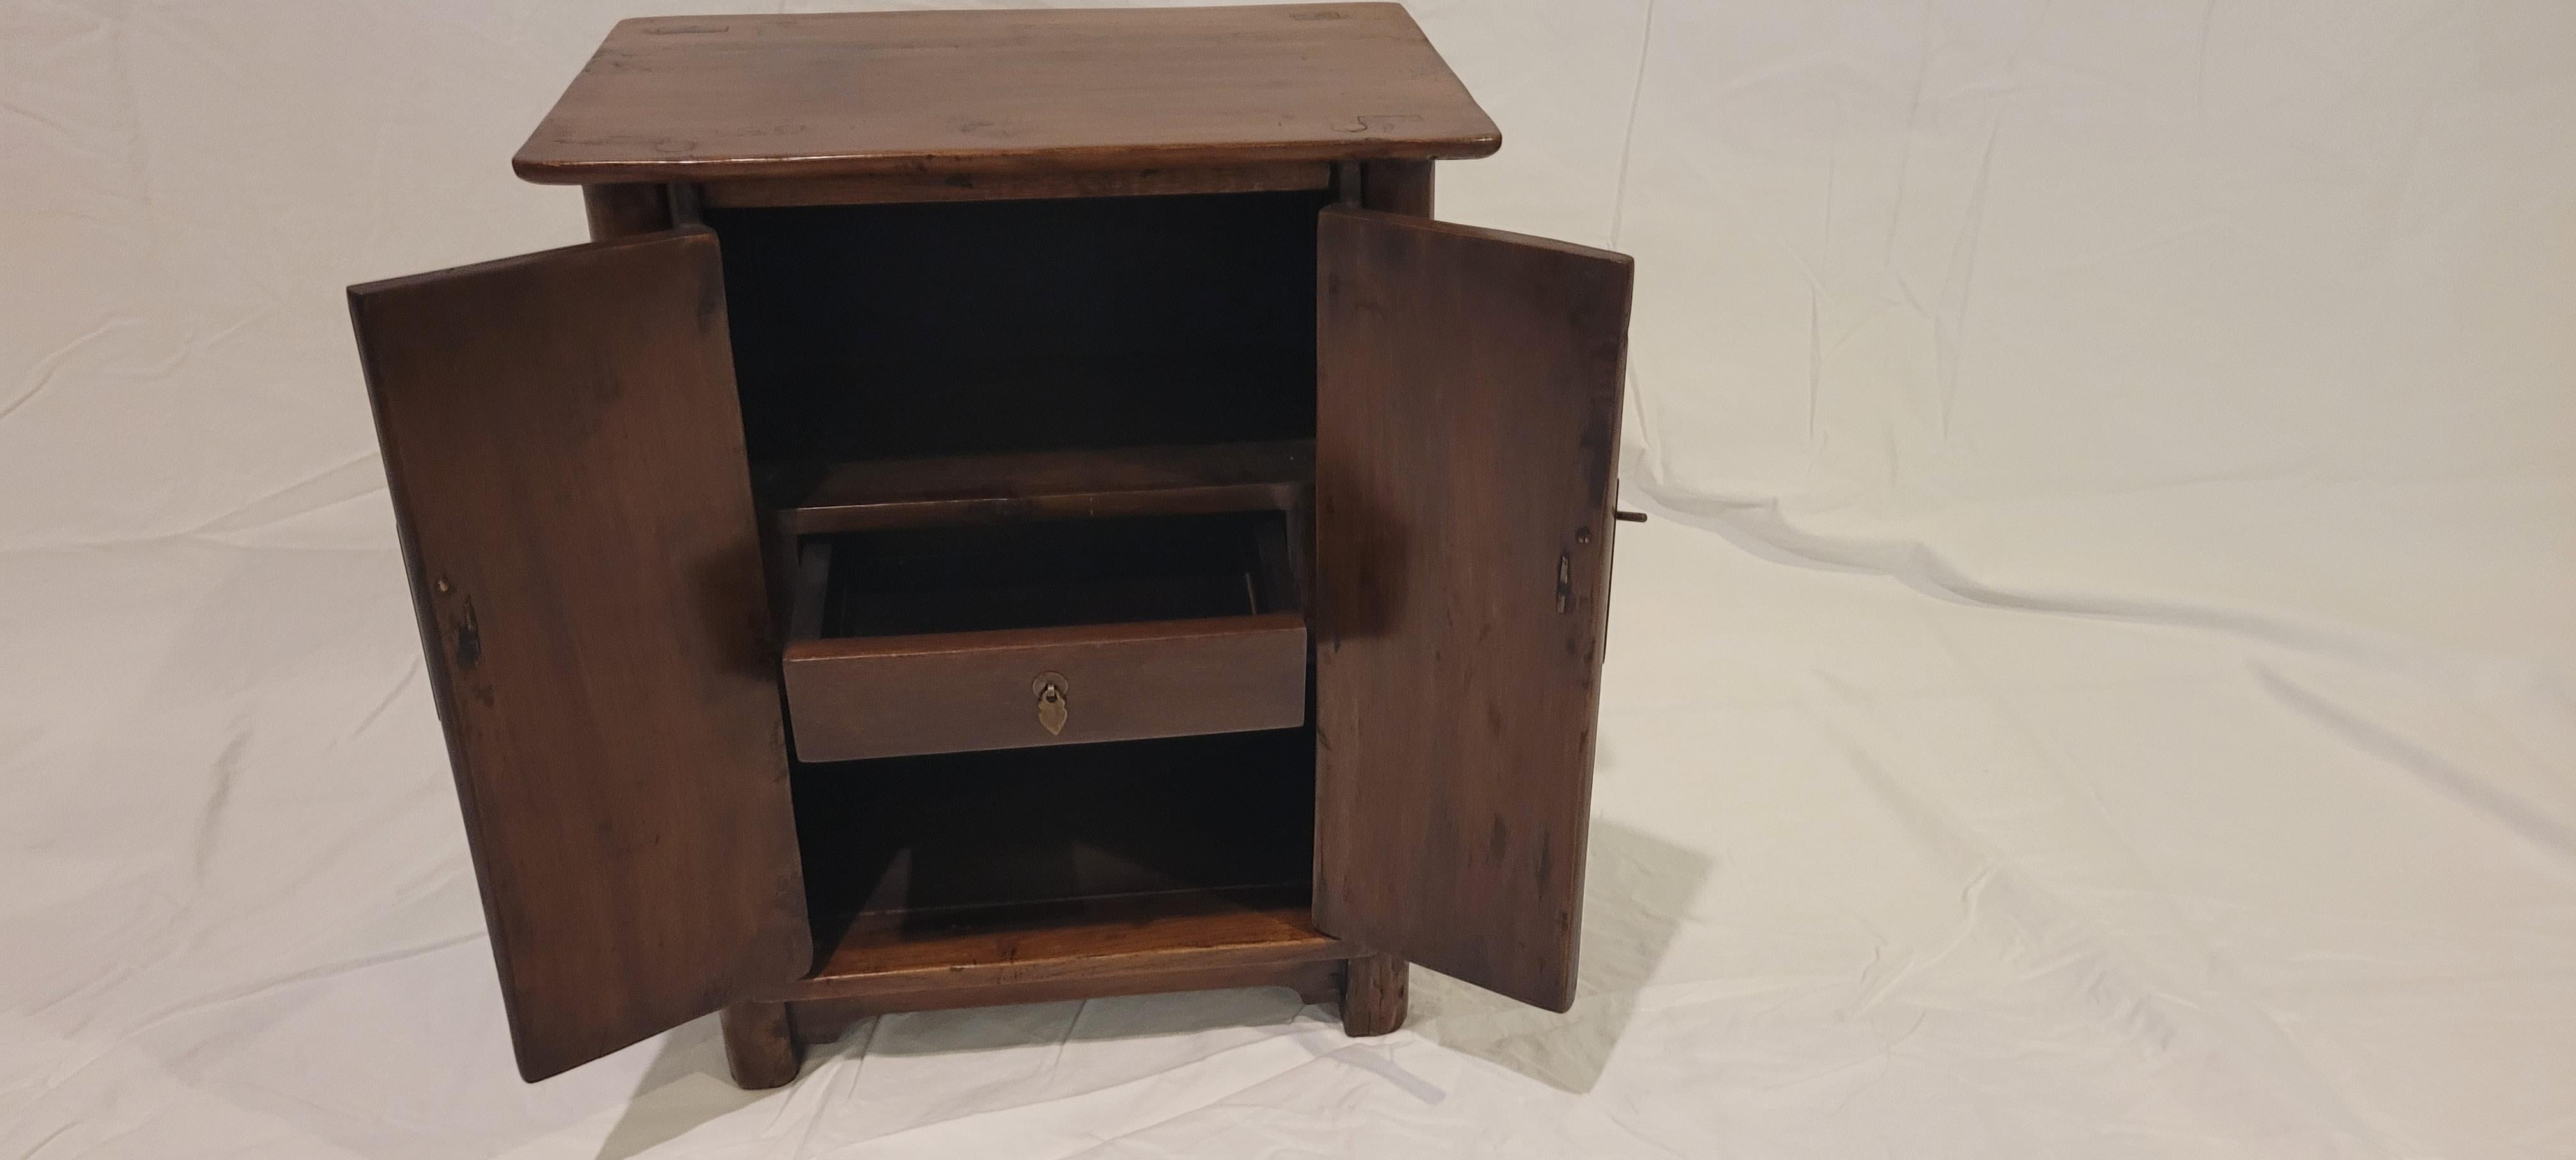 19th Century Small Kang Cabinet In Good Condition For Sale In Santa Monica, CA